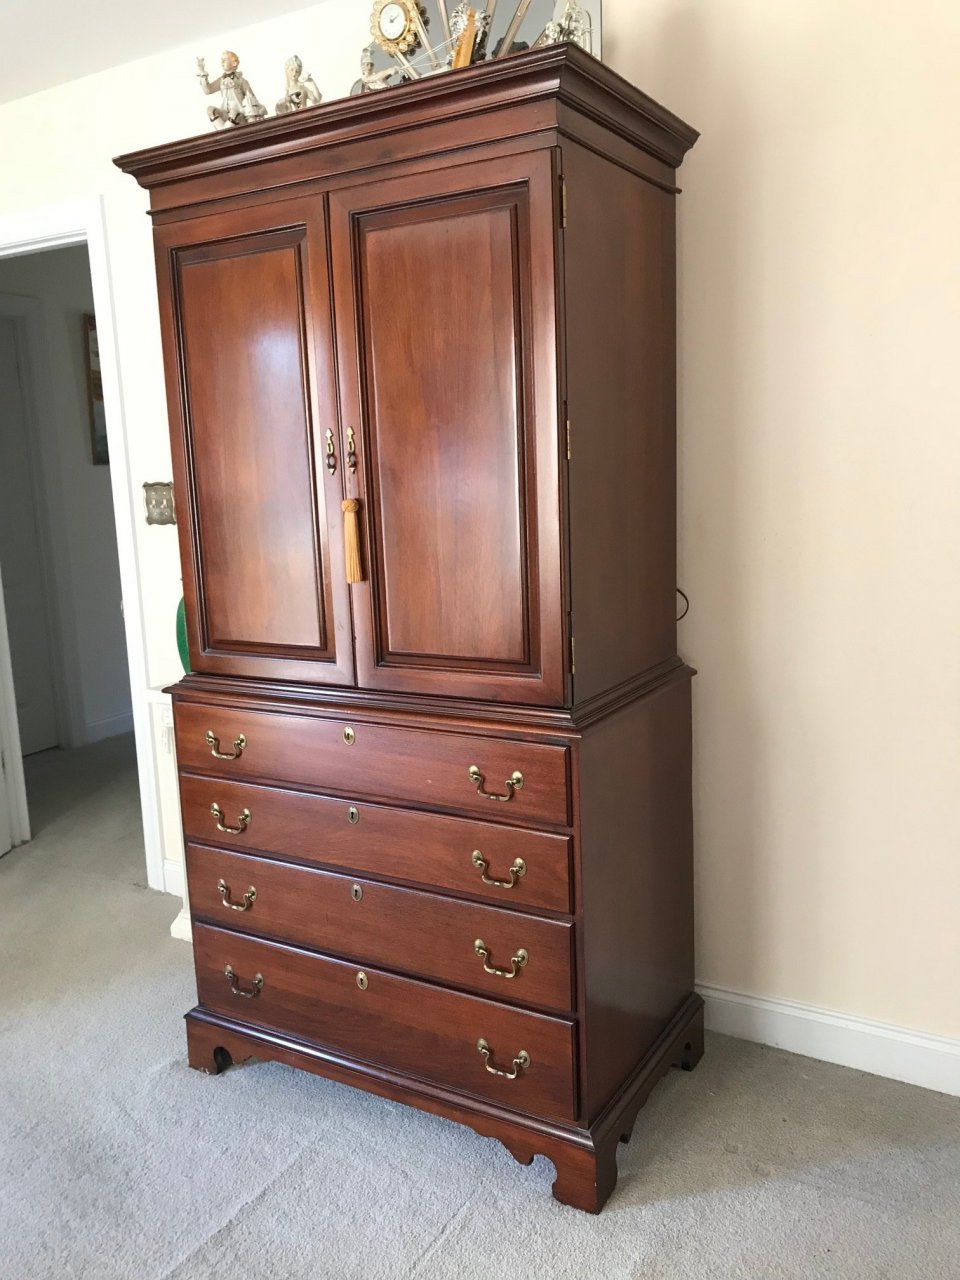 My Parents Have A Beautiful Link-Taylor Mahogany Bedroom Set That They